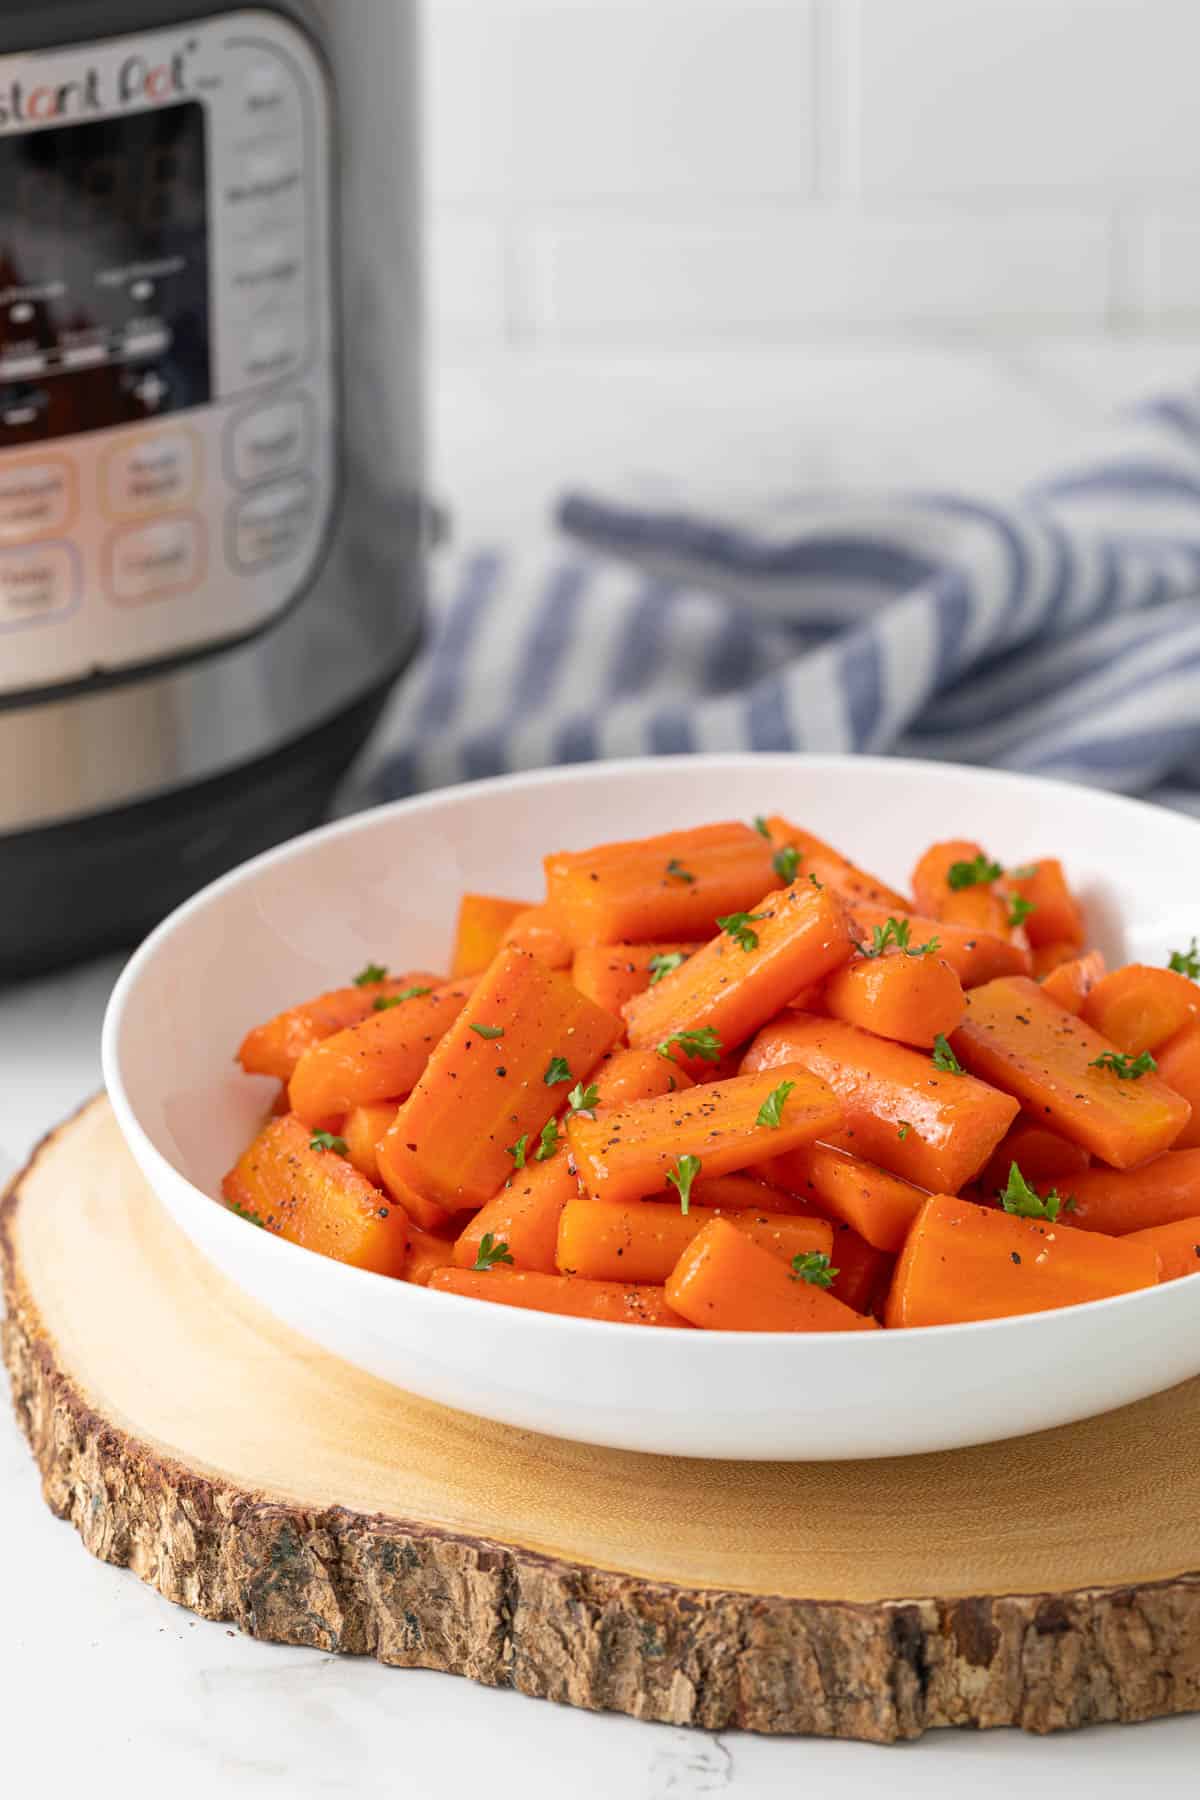 Glazed carrots in a white bowl. An Instant Pot pressure cooker is in the background.